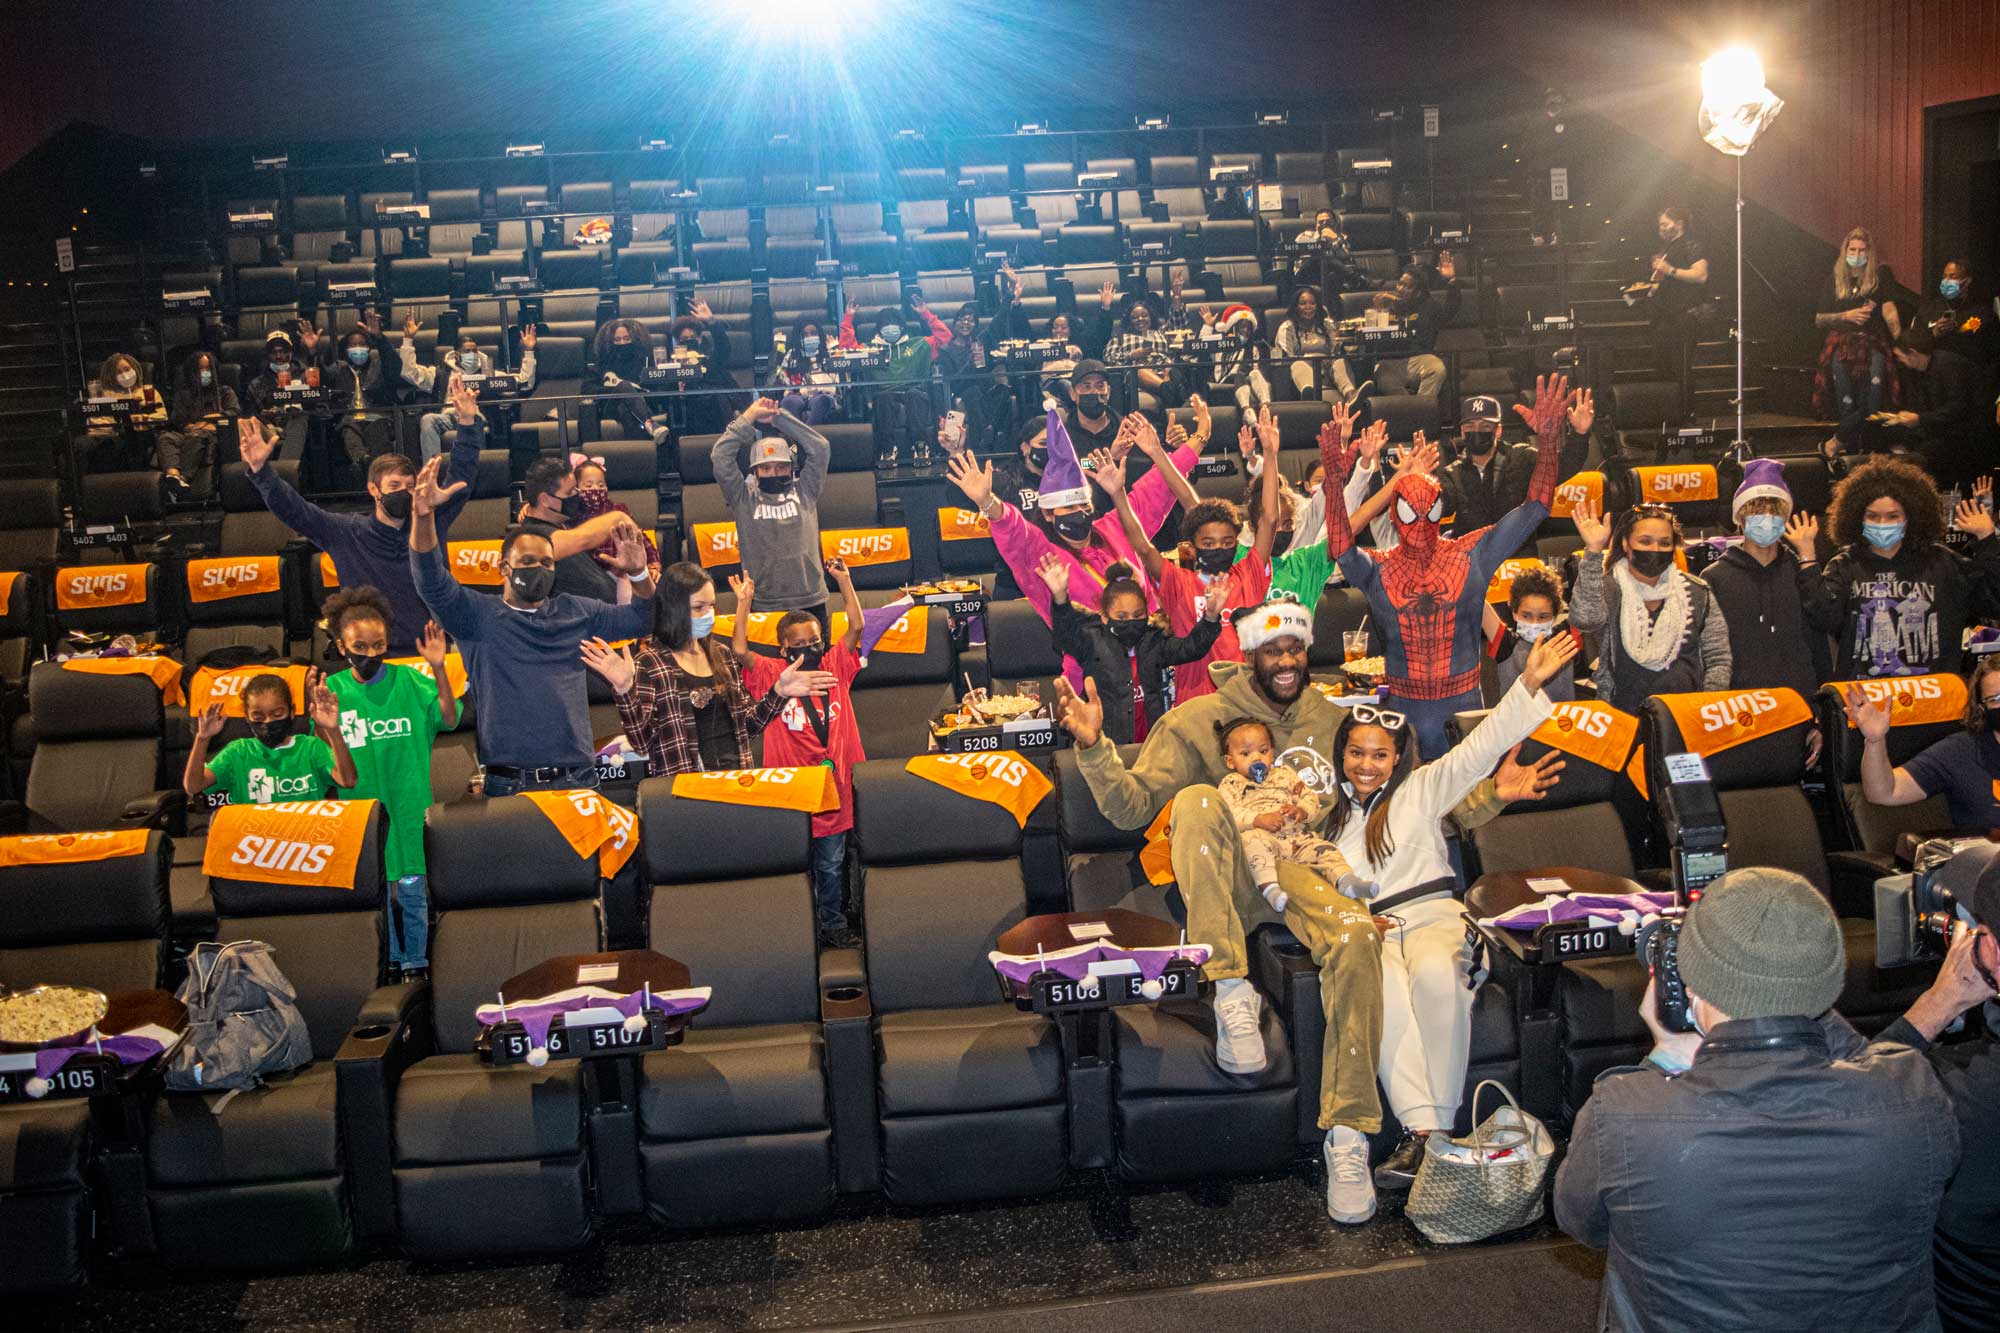 People waving at a Phoenix Suns event in a theater